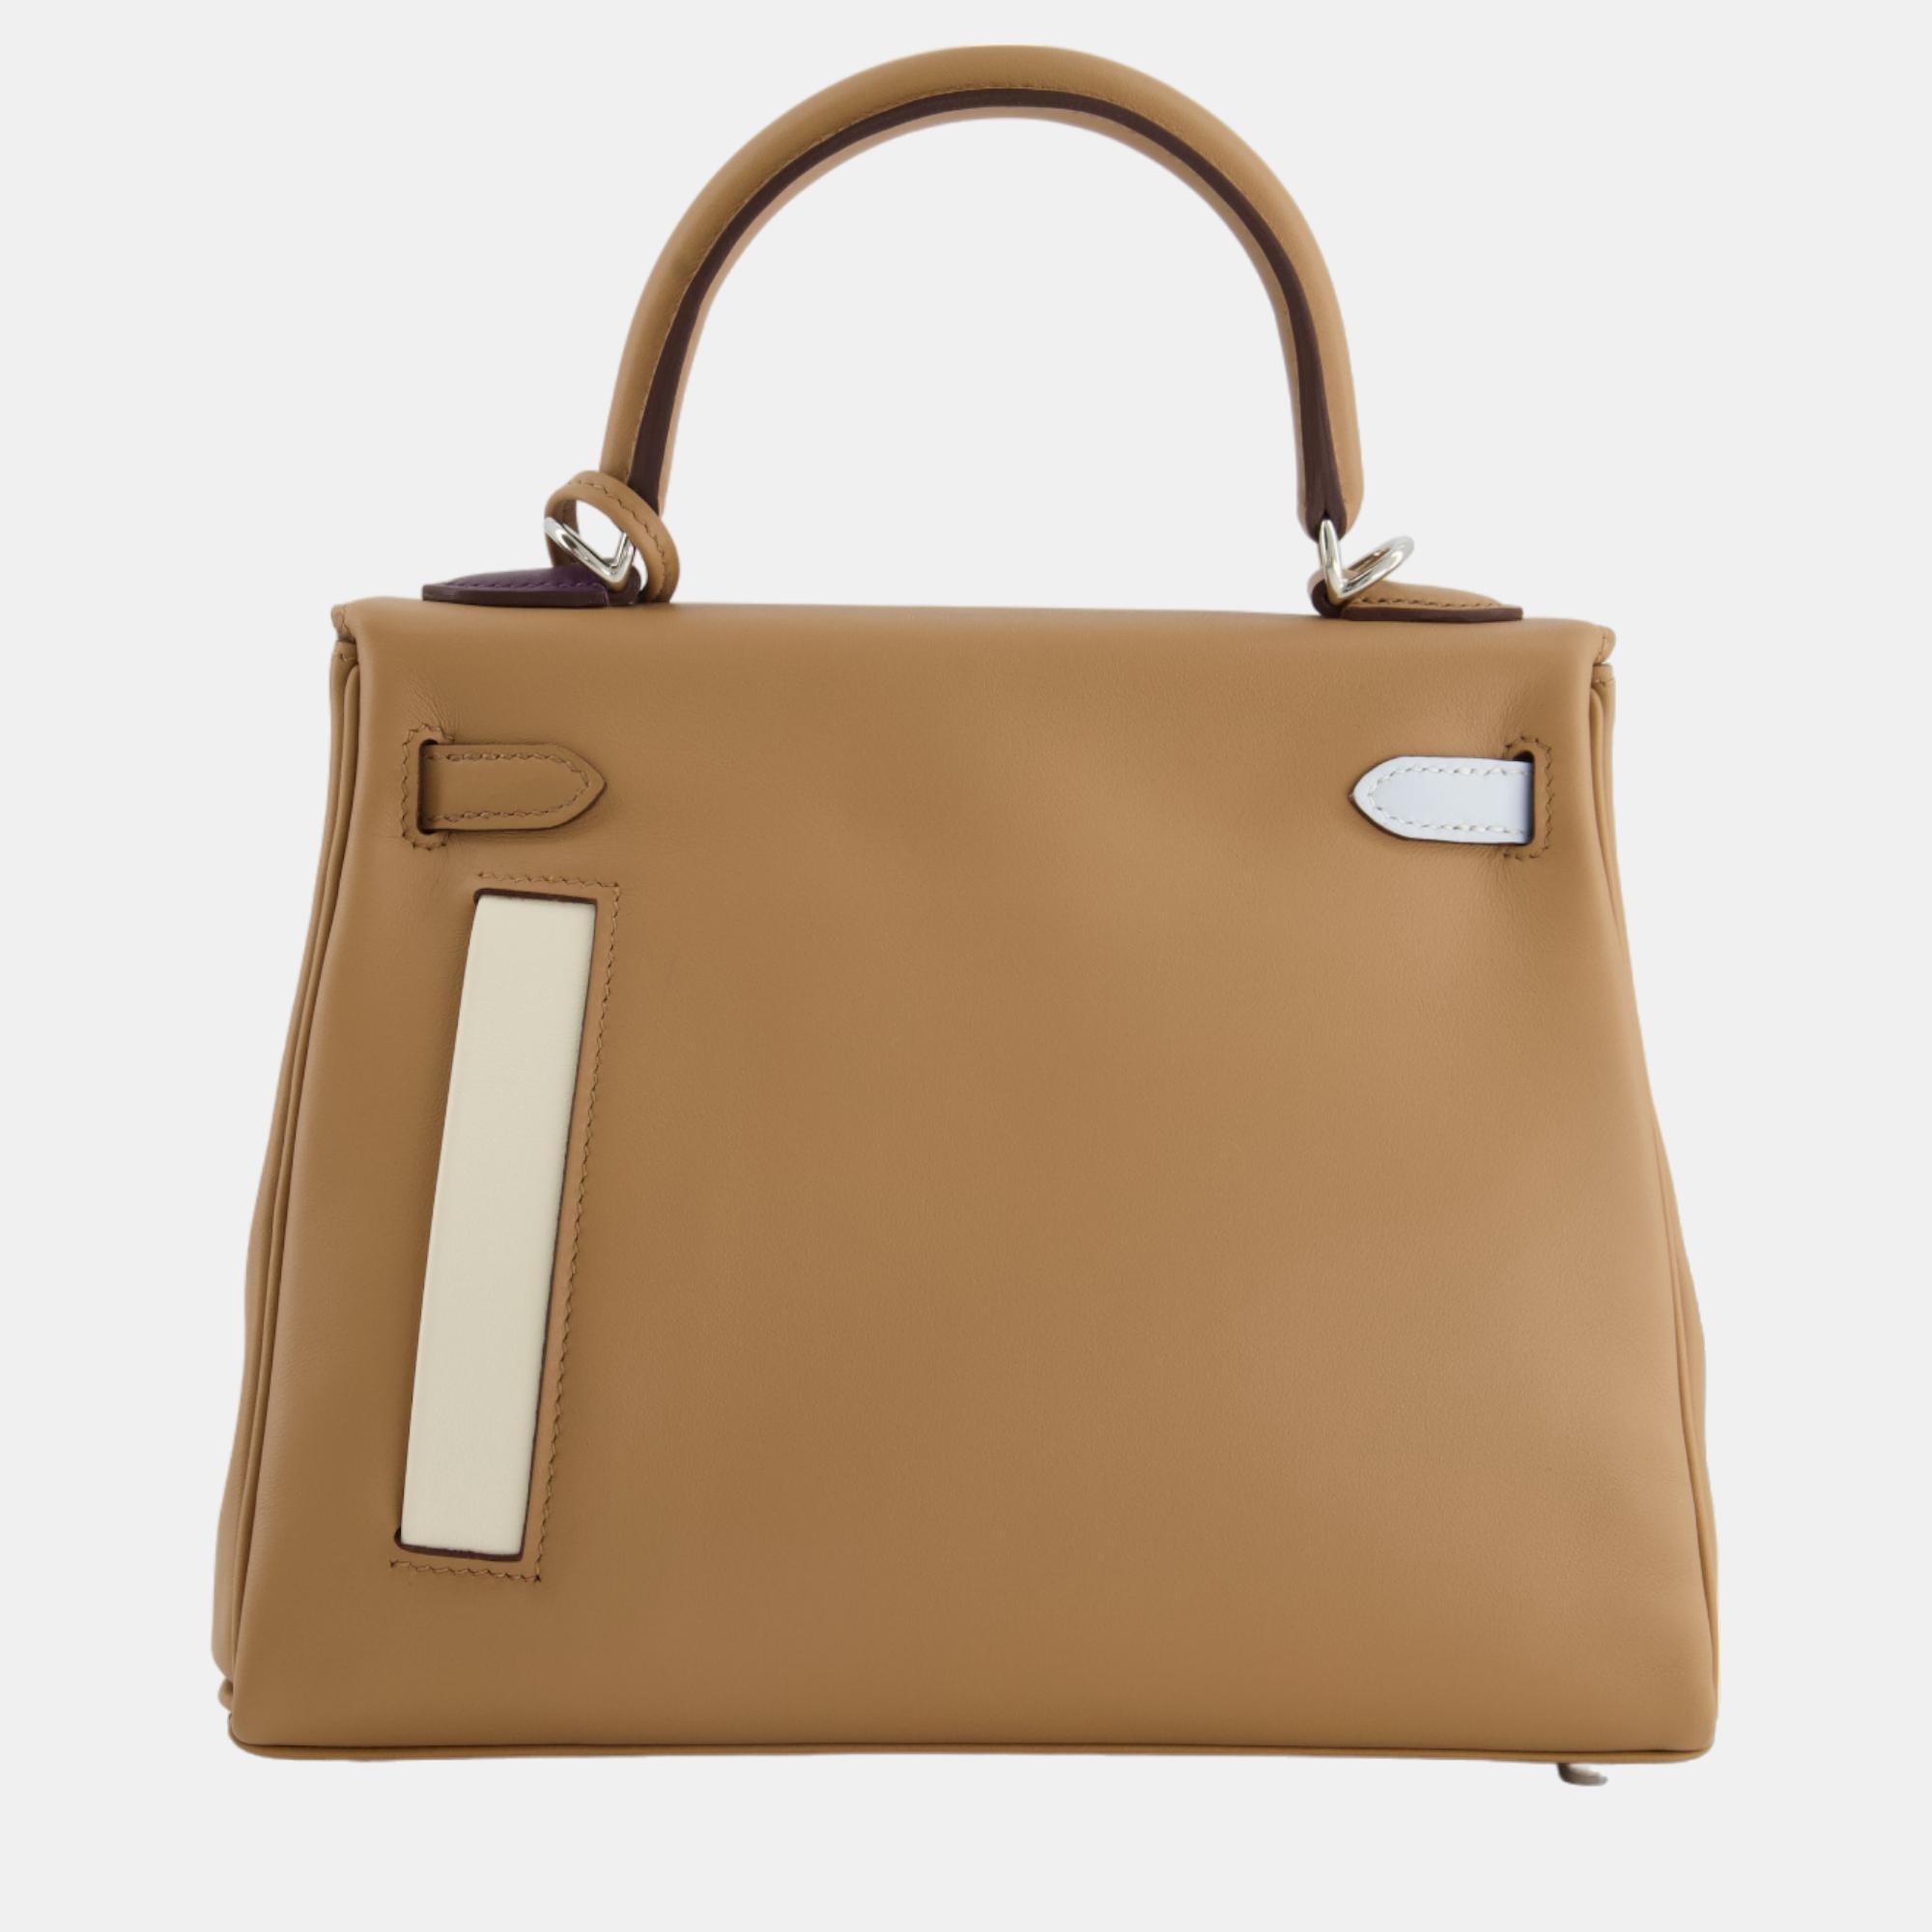 Hermes Kelly 25cm Colormatic Chai, Lime, Blue Brume, Nata And Mauve Sylvestre In Swift Leather Palladium Hardware